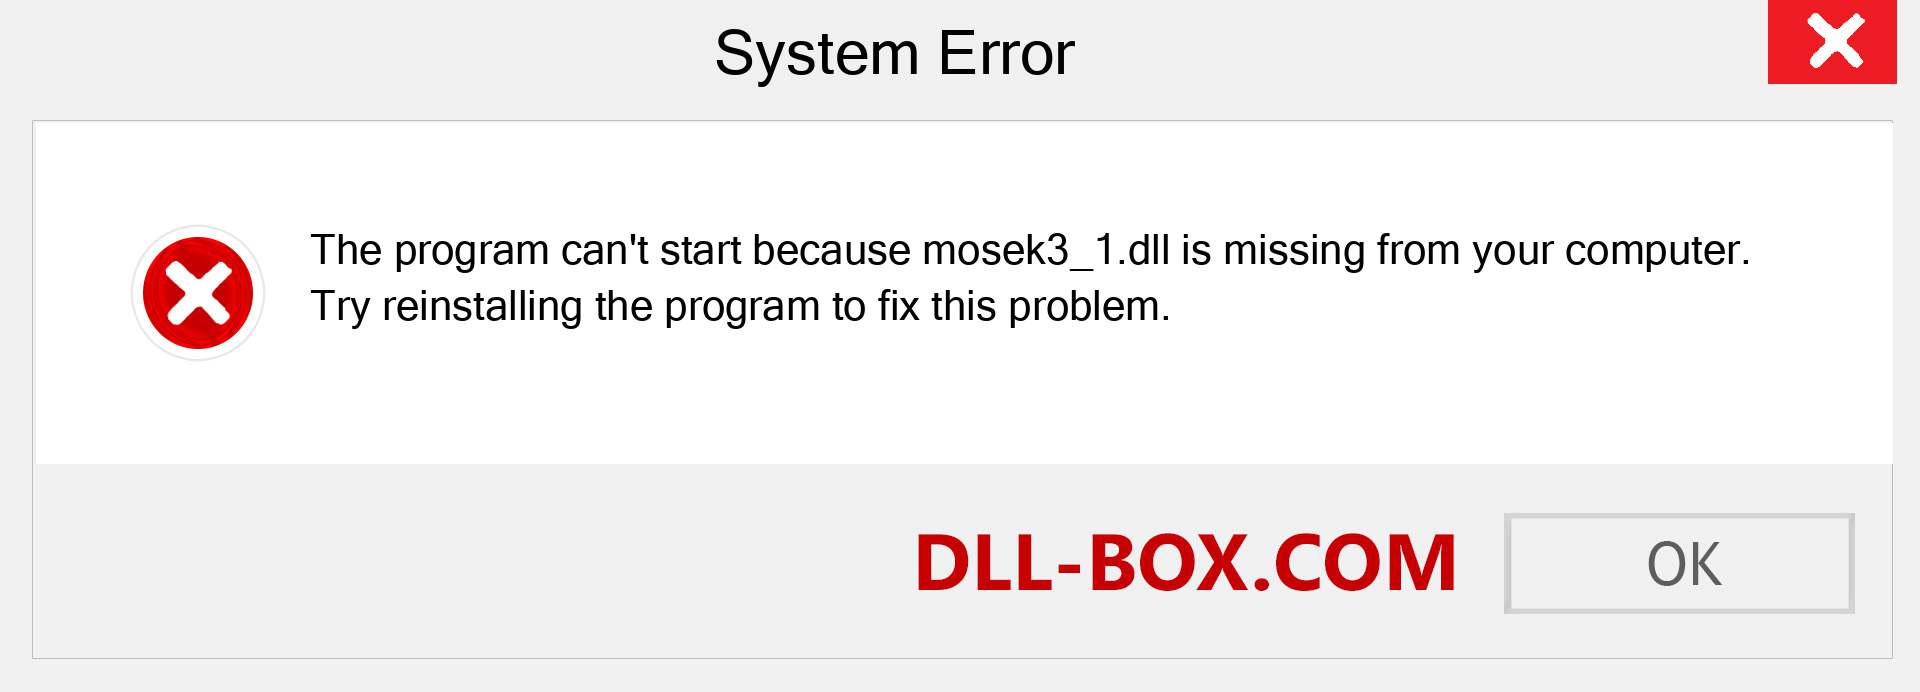  mosek3_1.dll file is missing?. Download for Windows 7, 8, 10 - Fix  mosek3_1 dll Missing Error on Windows, photos, images